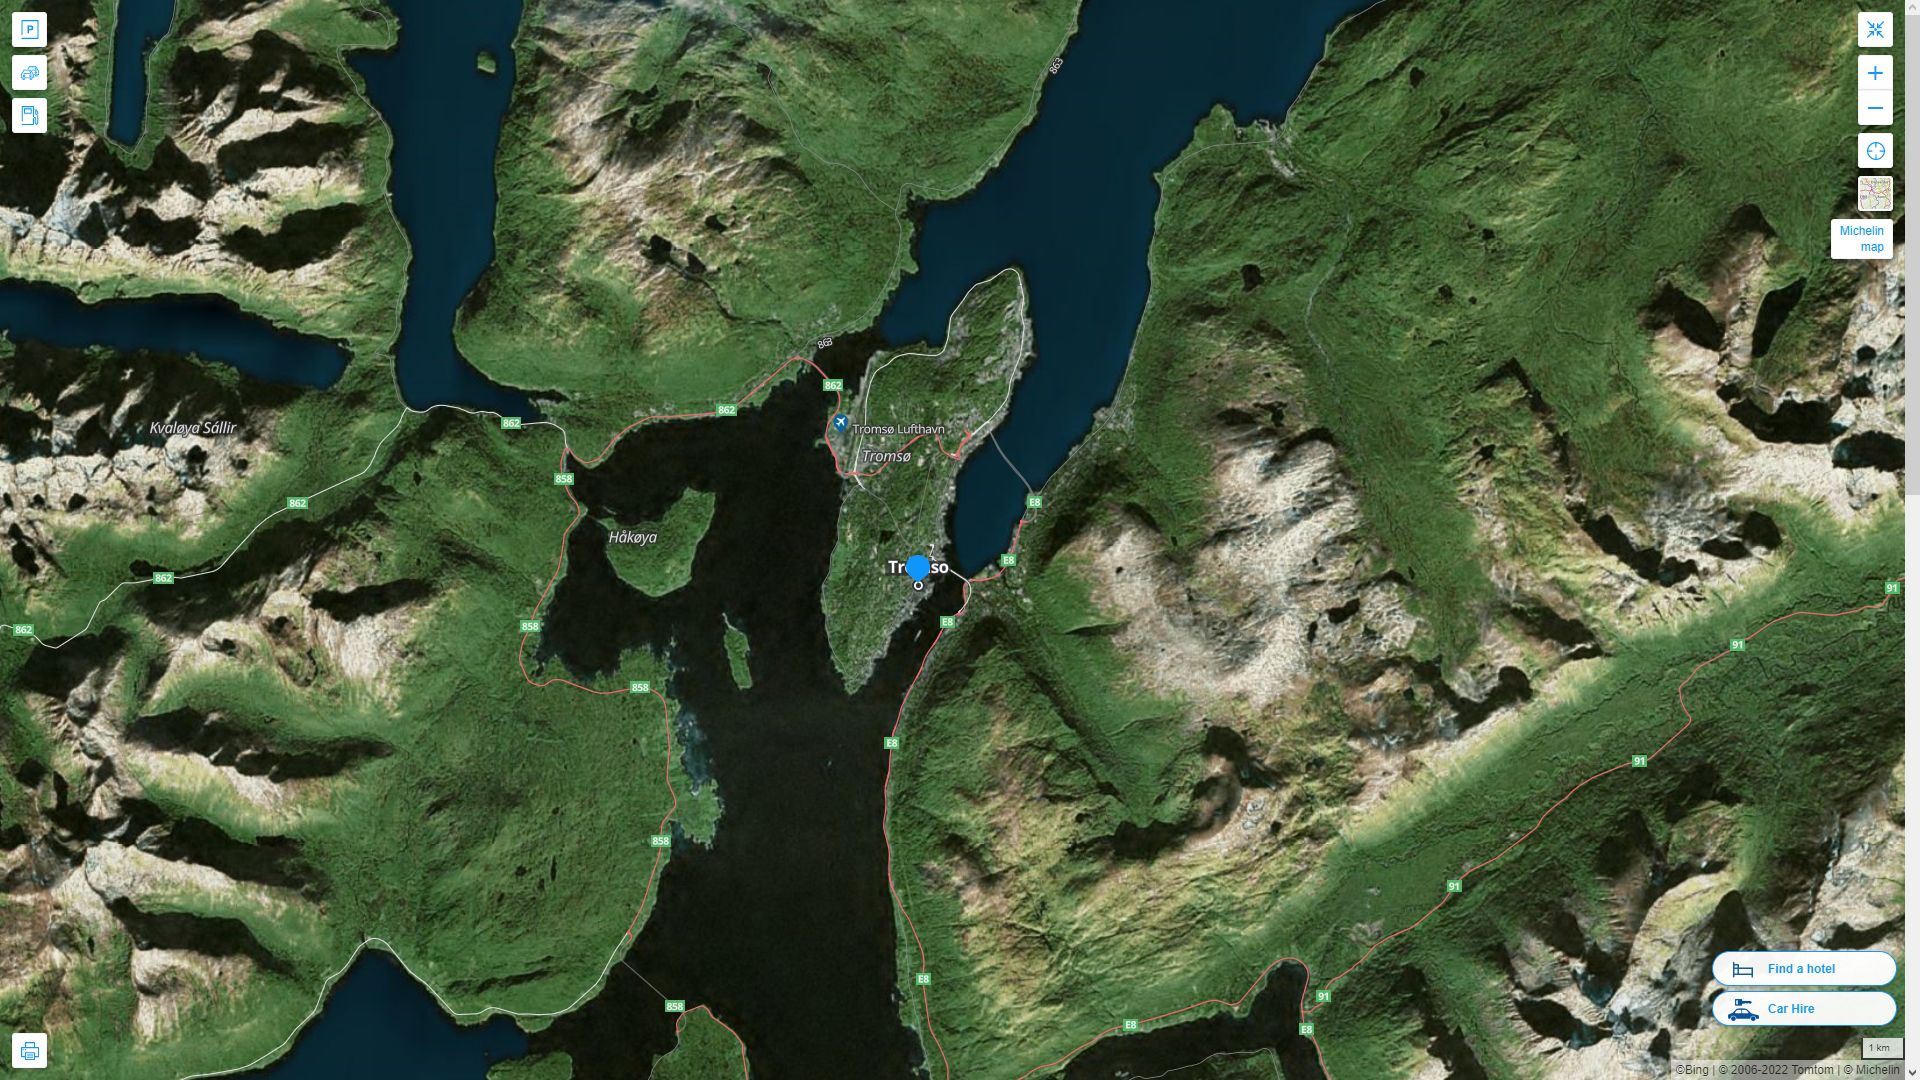 Tromso Highway and Road Map with Satellite View